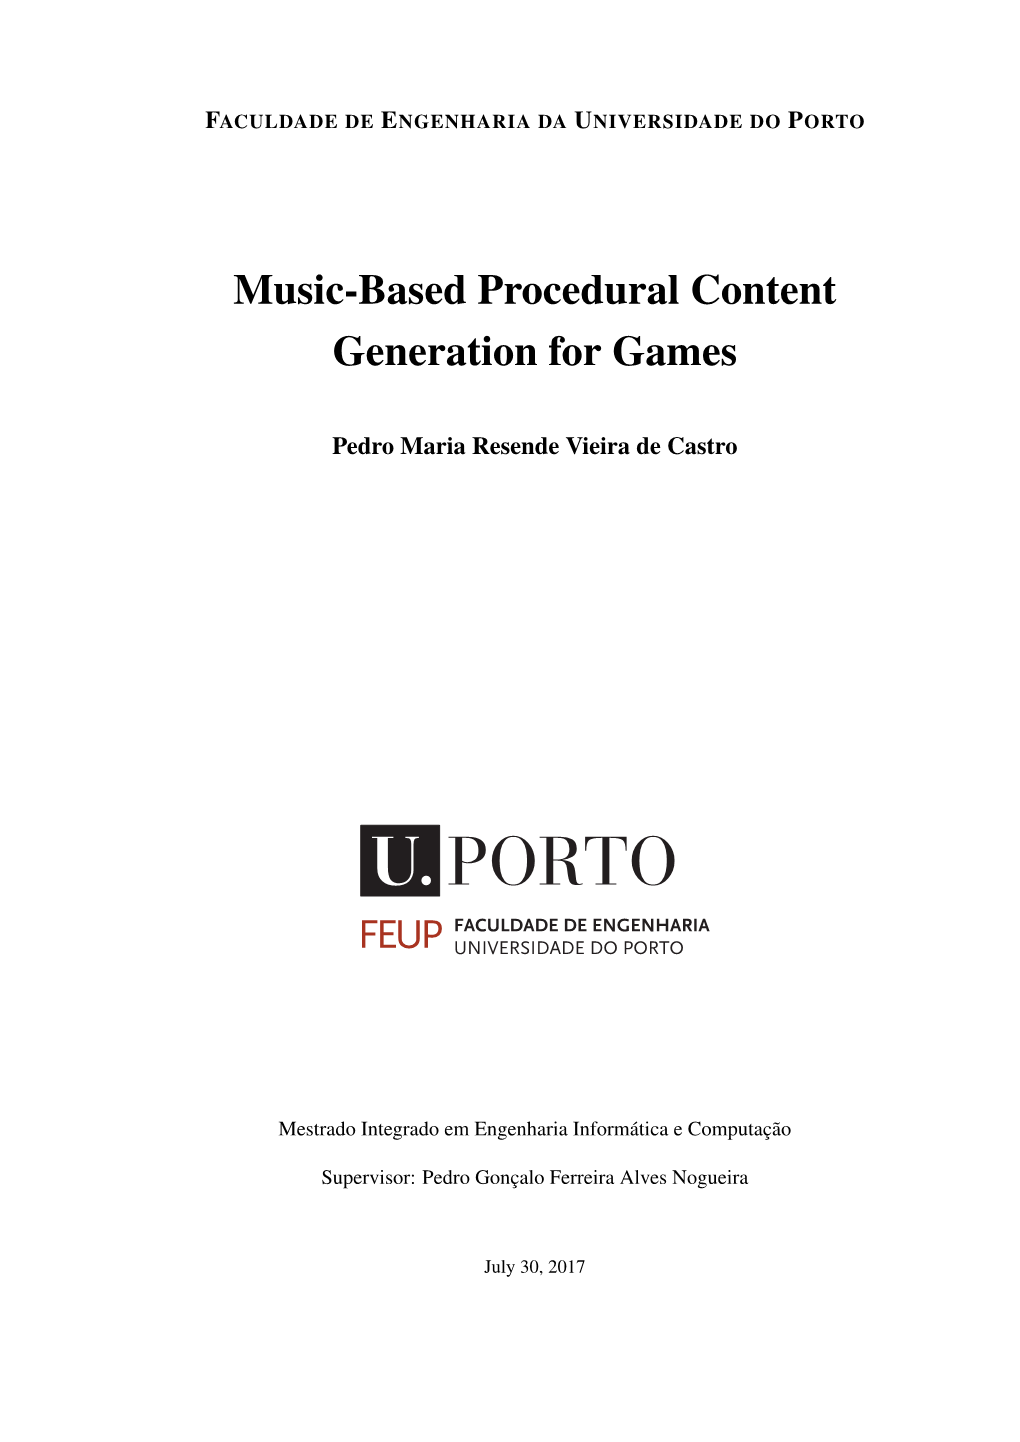 Music-Based Procedural Content Generation for Games